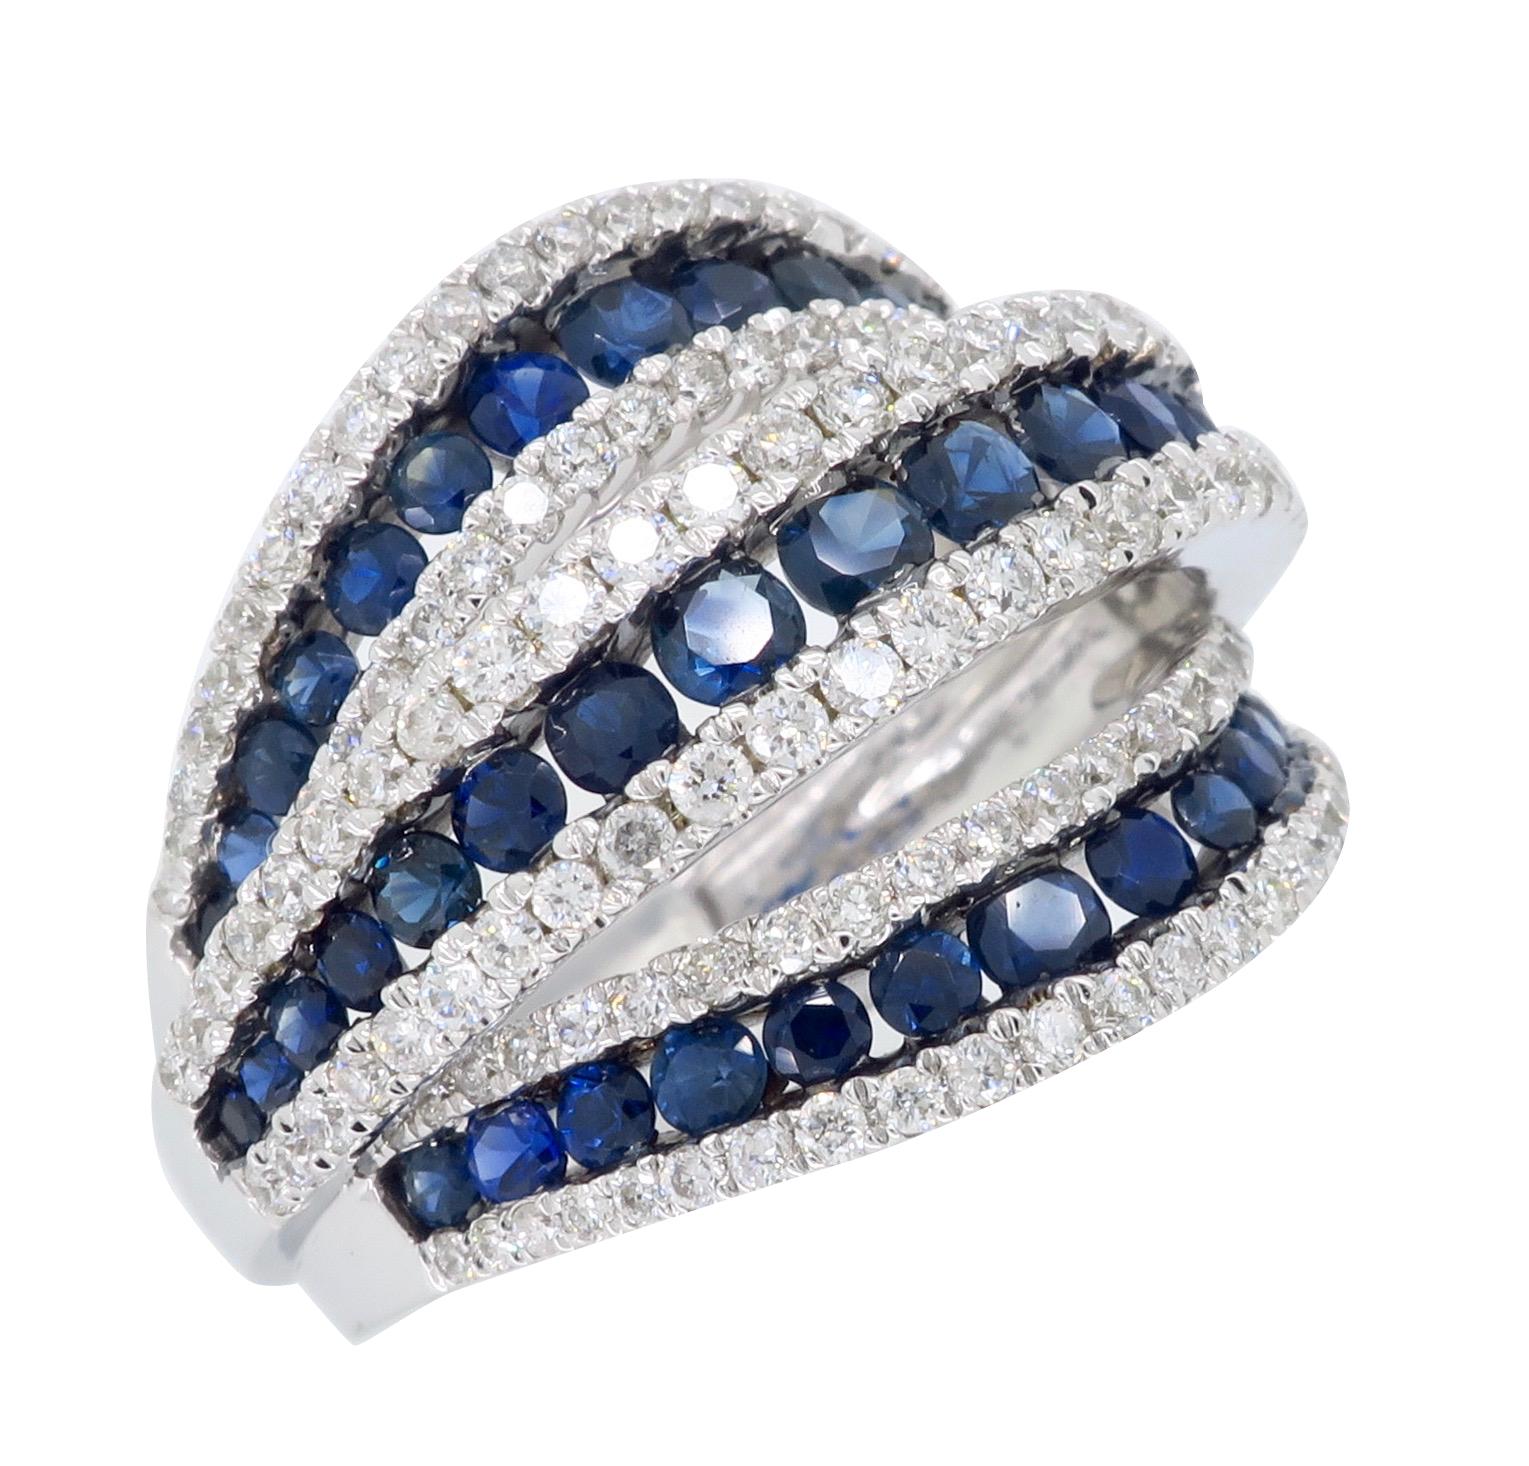 Diamond and Blue Sapphire Cocktail Ring 5